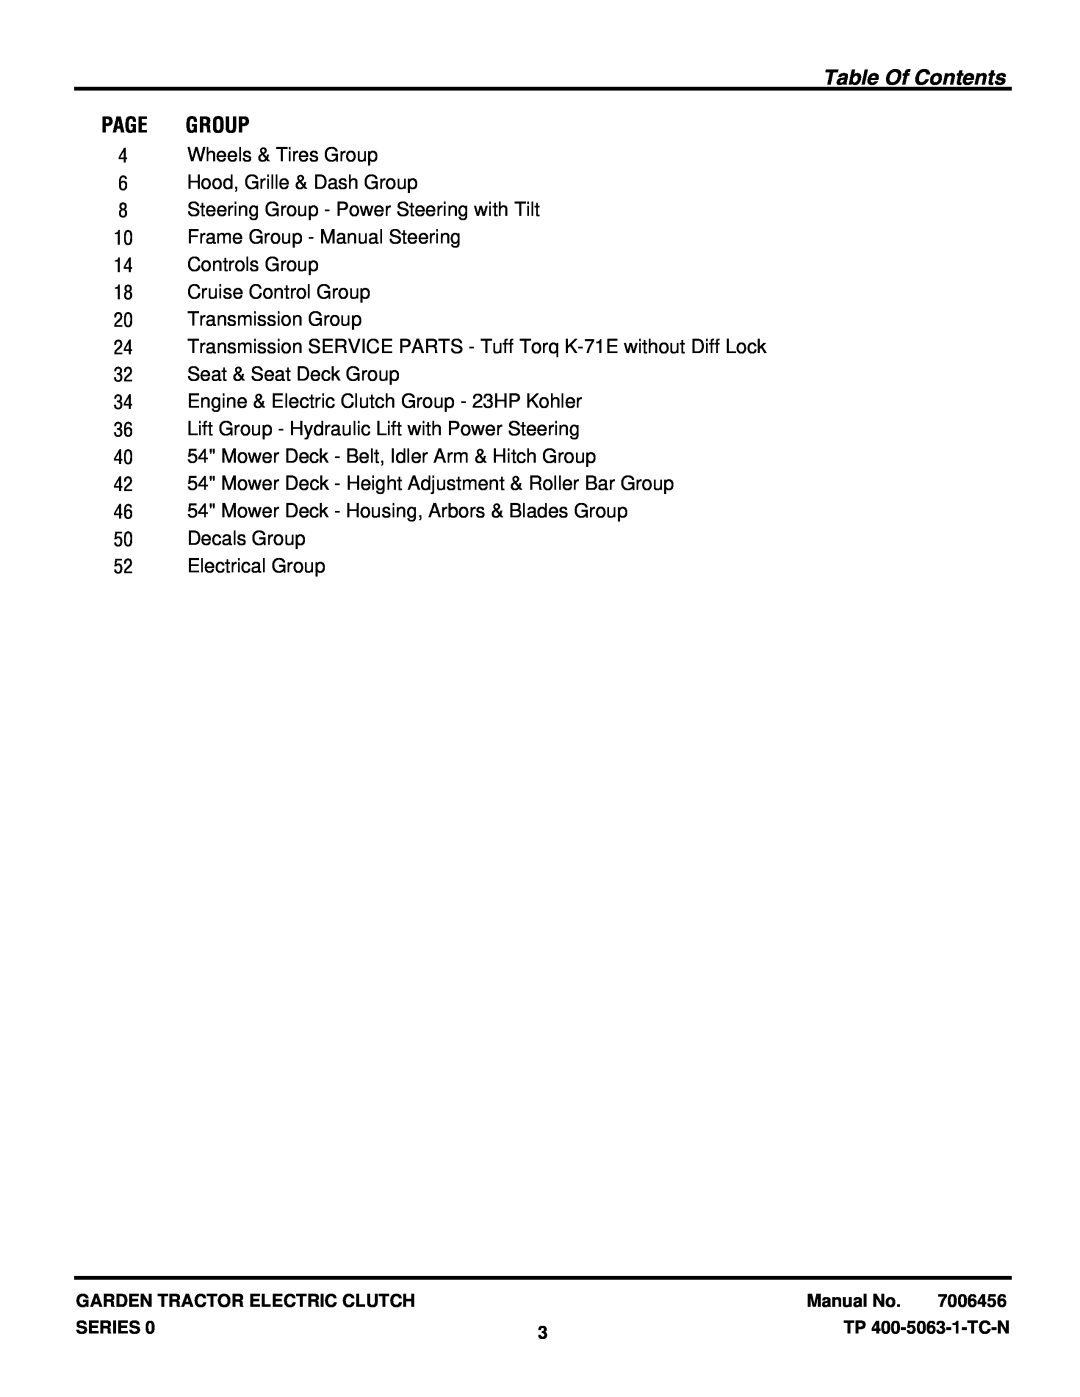 Briggs & Stratton GT23540 (2690258), GT23540 (1694621) manual Table Of Contents, Page Group 